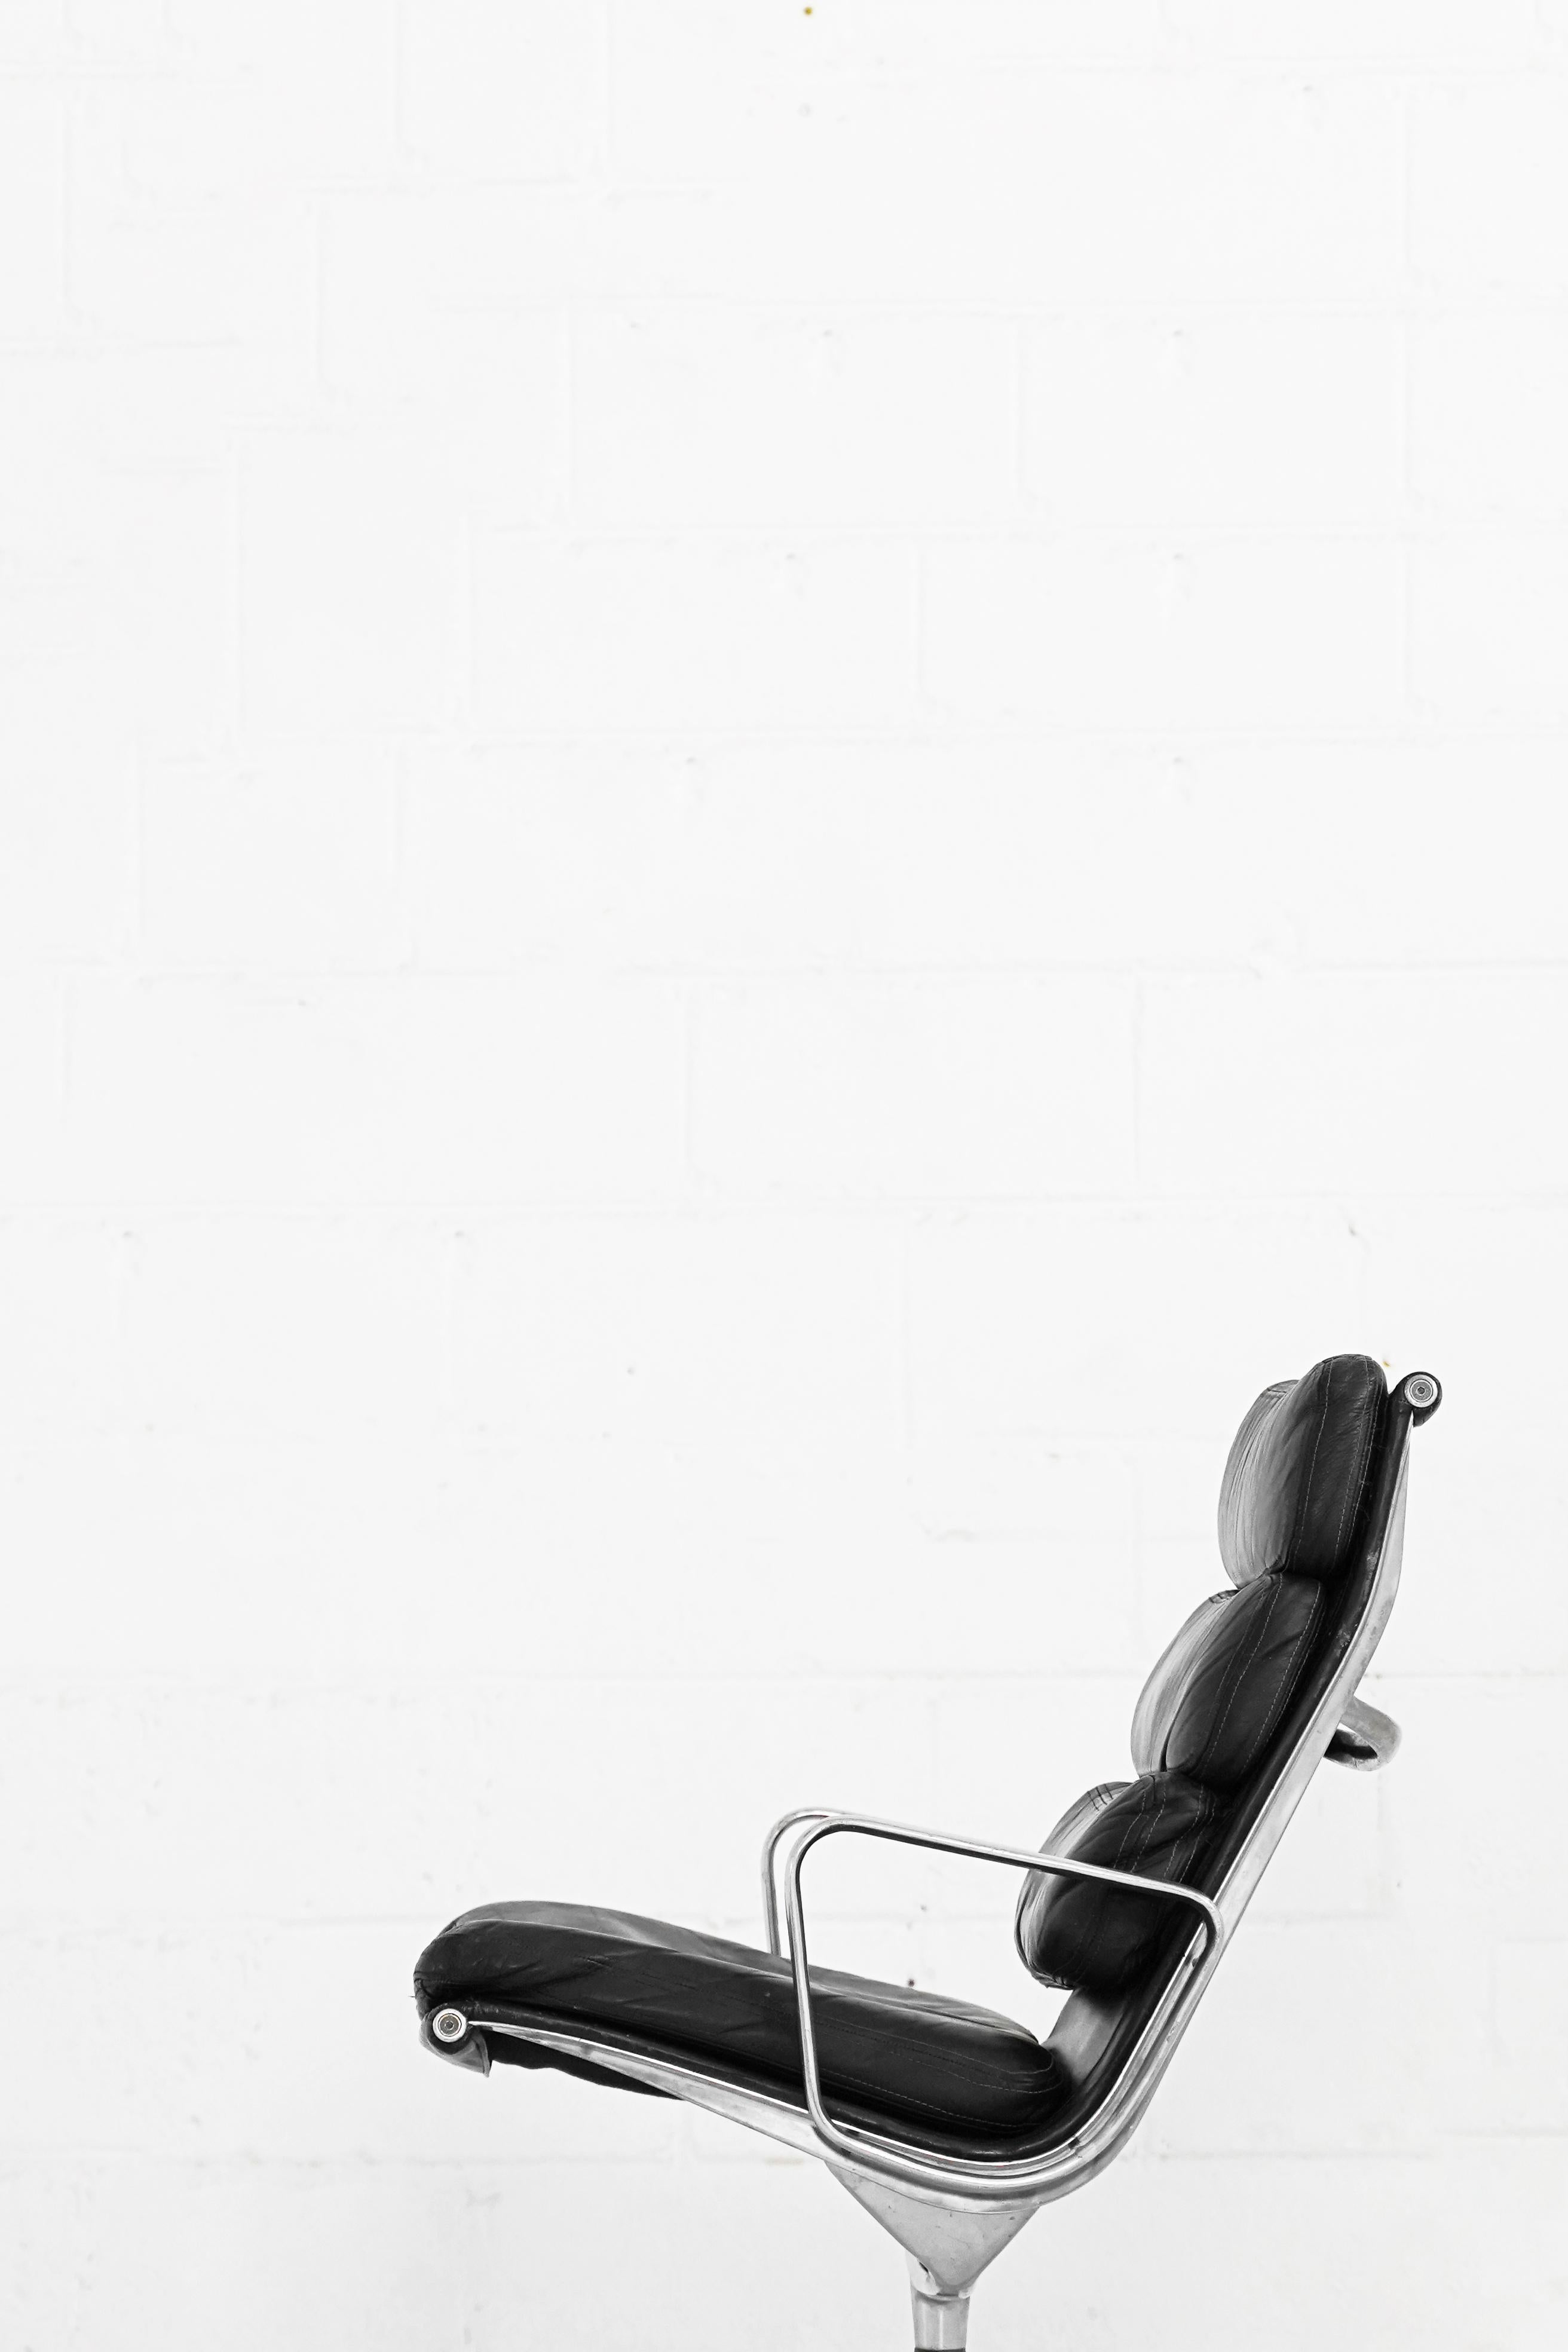 Mid-Century Modern Eames Soft Pad Lounge Chair by Charles and Ray Eames for Herman Miller